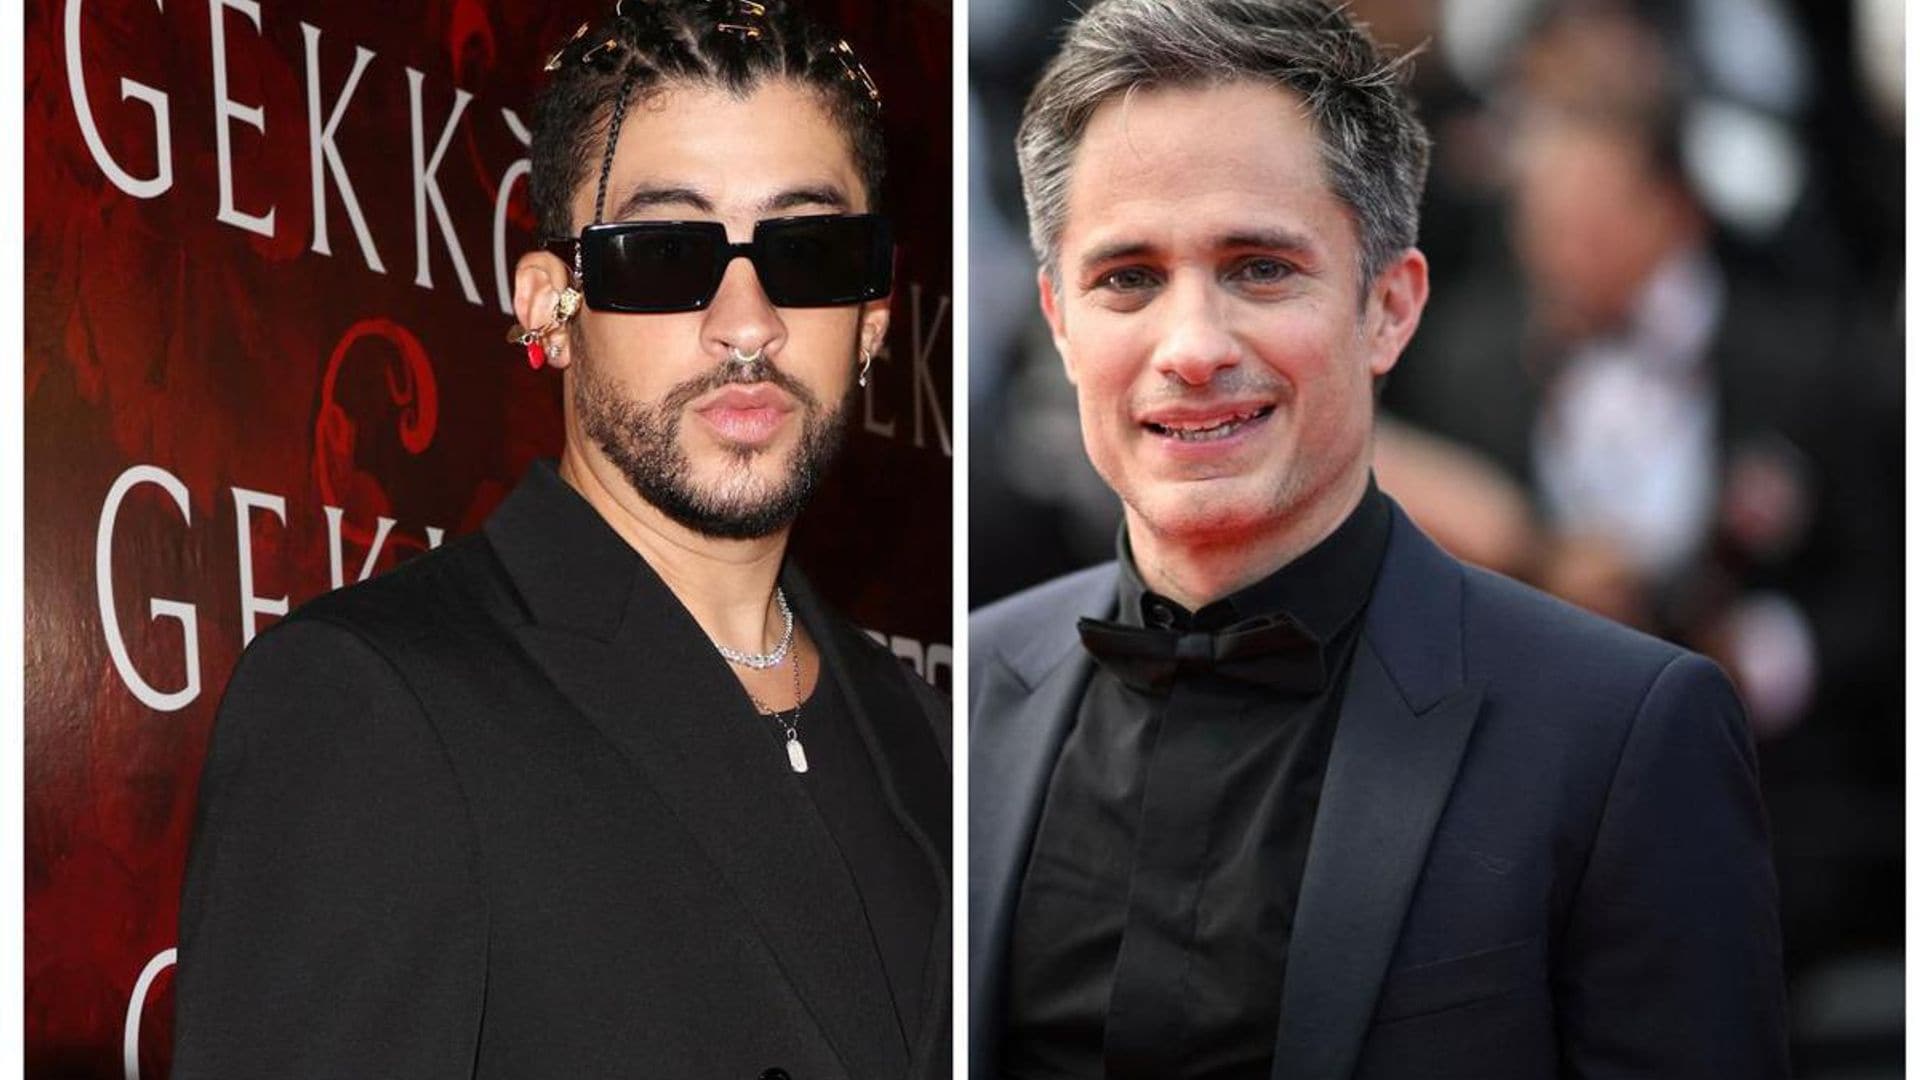 Bad Bunny shares passionate kiss with Gael García Bernal and fans go crazy